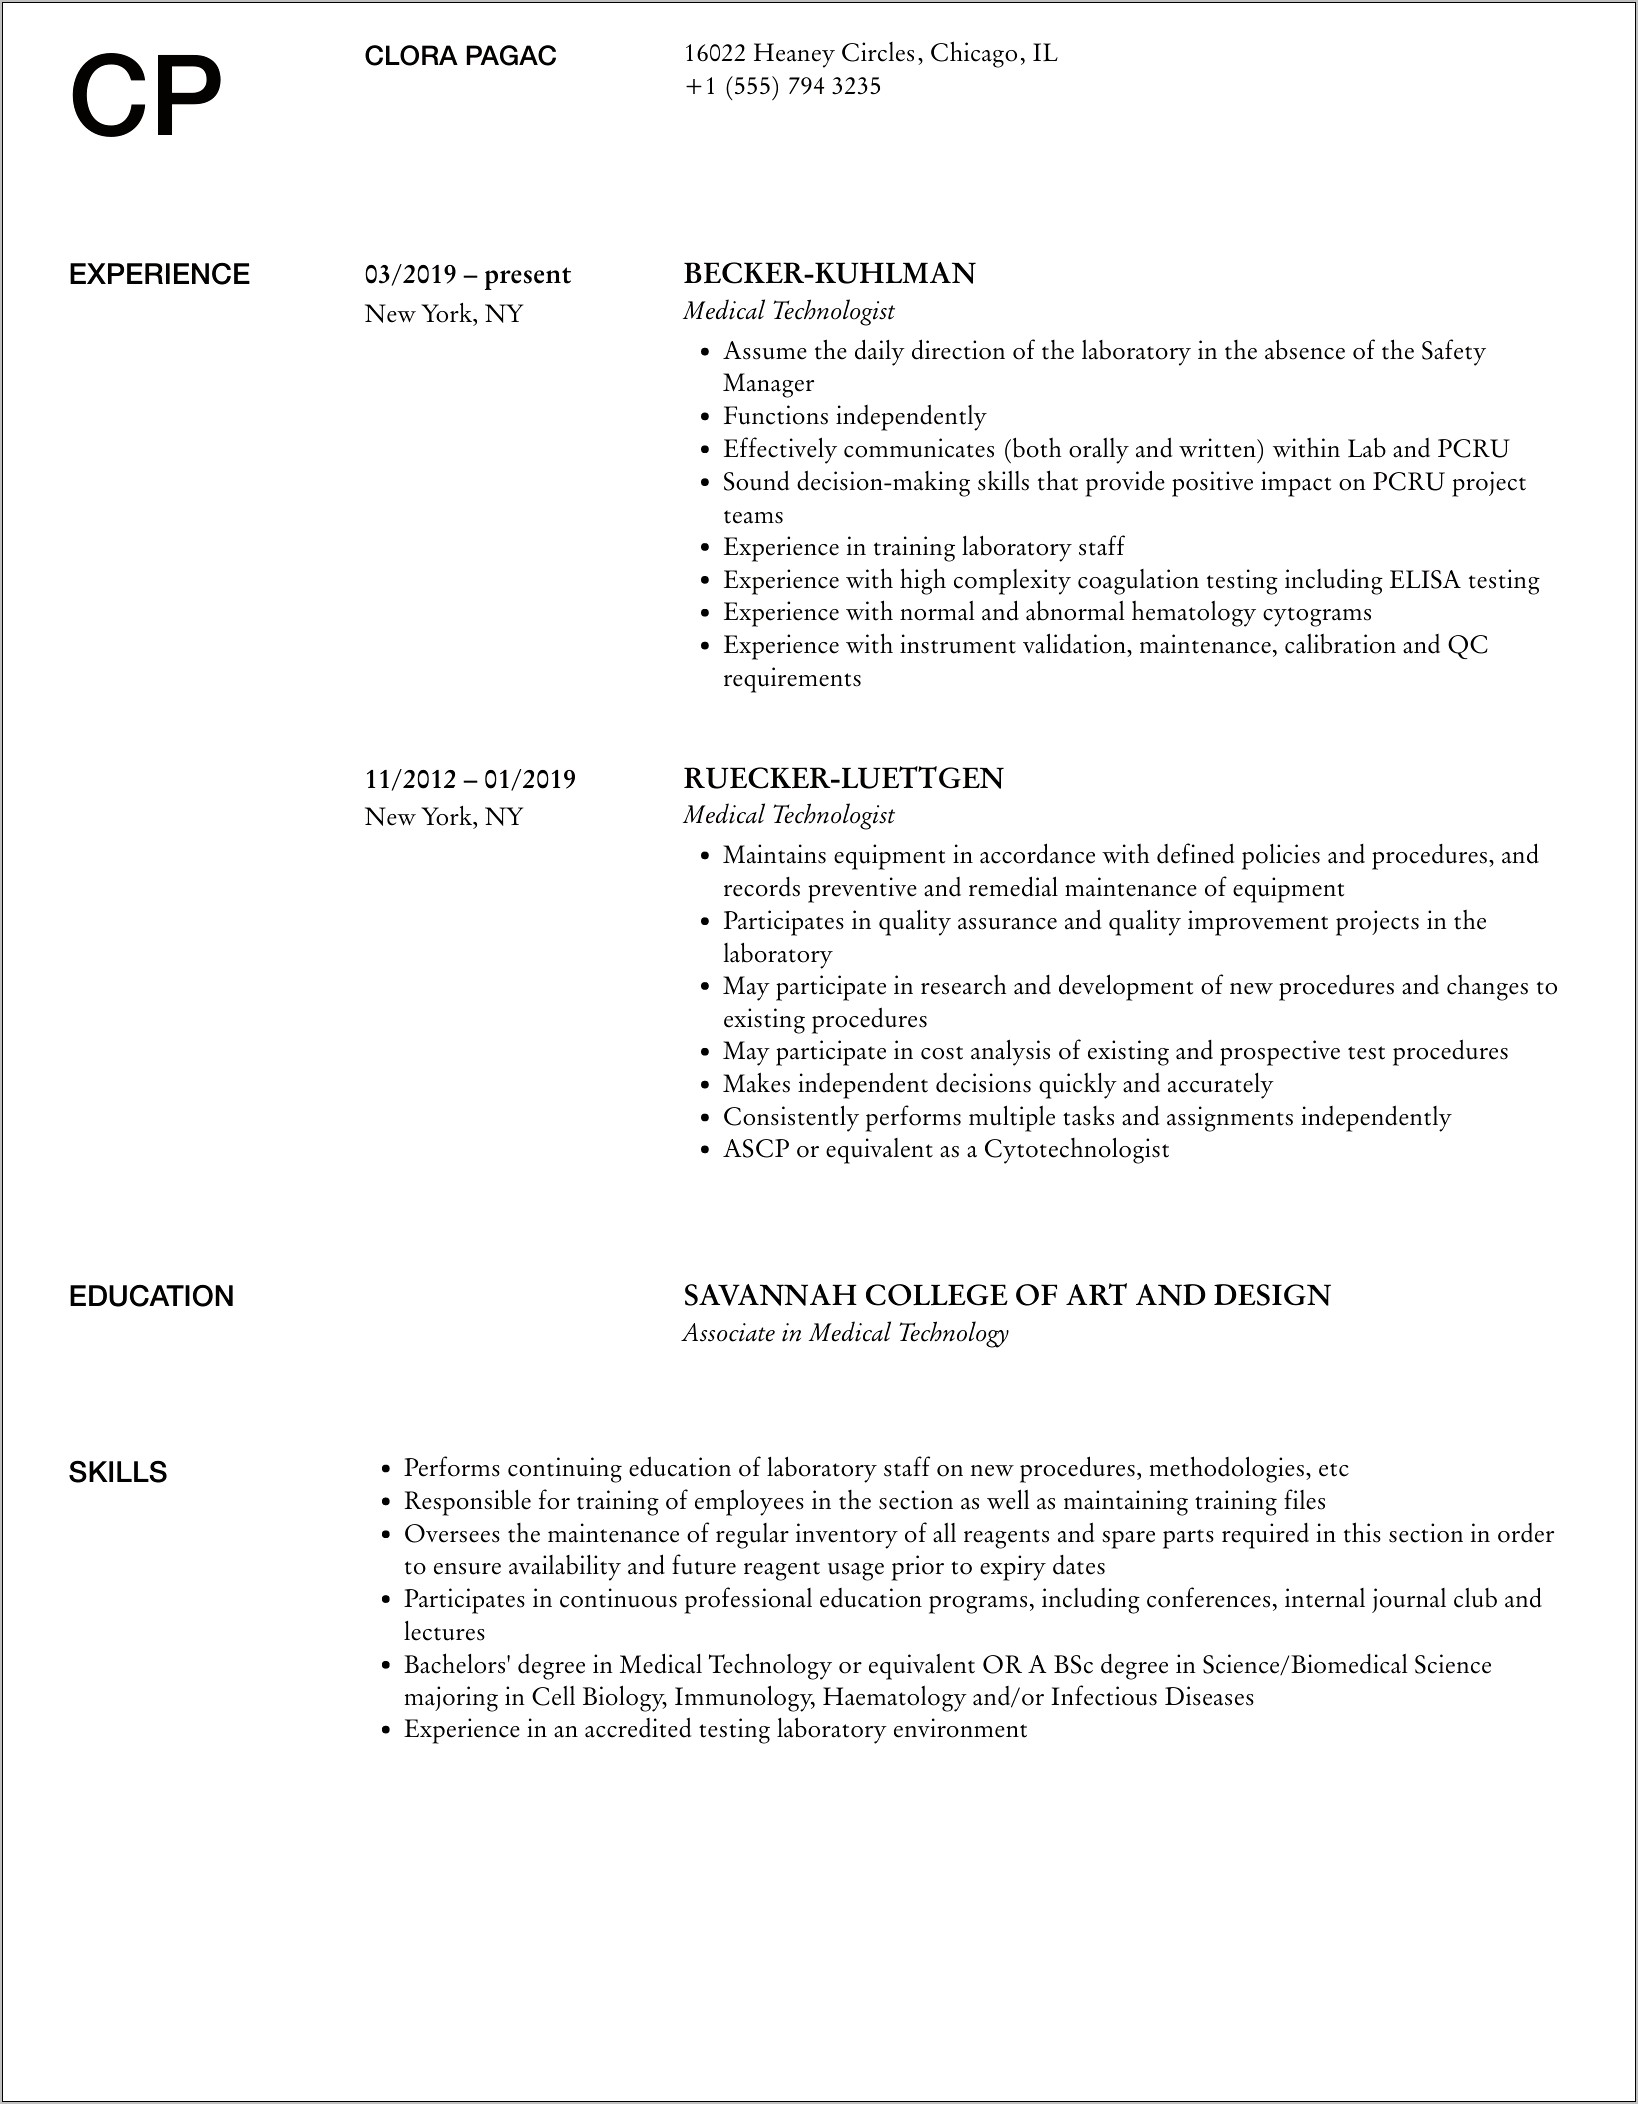 Example Of Resume Medical Technologist